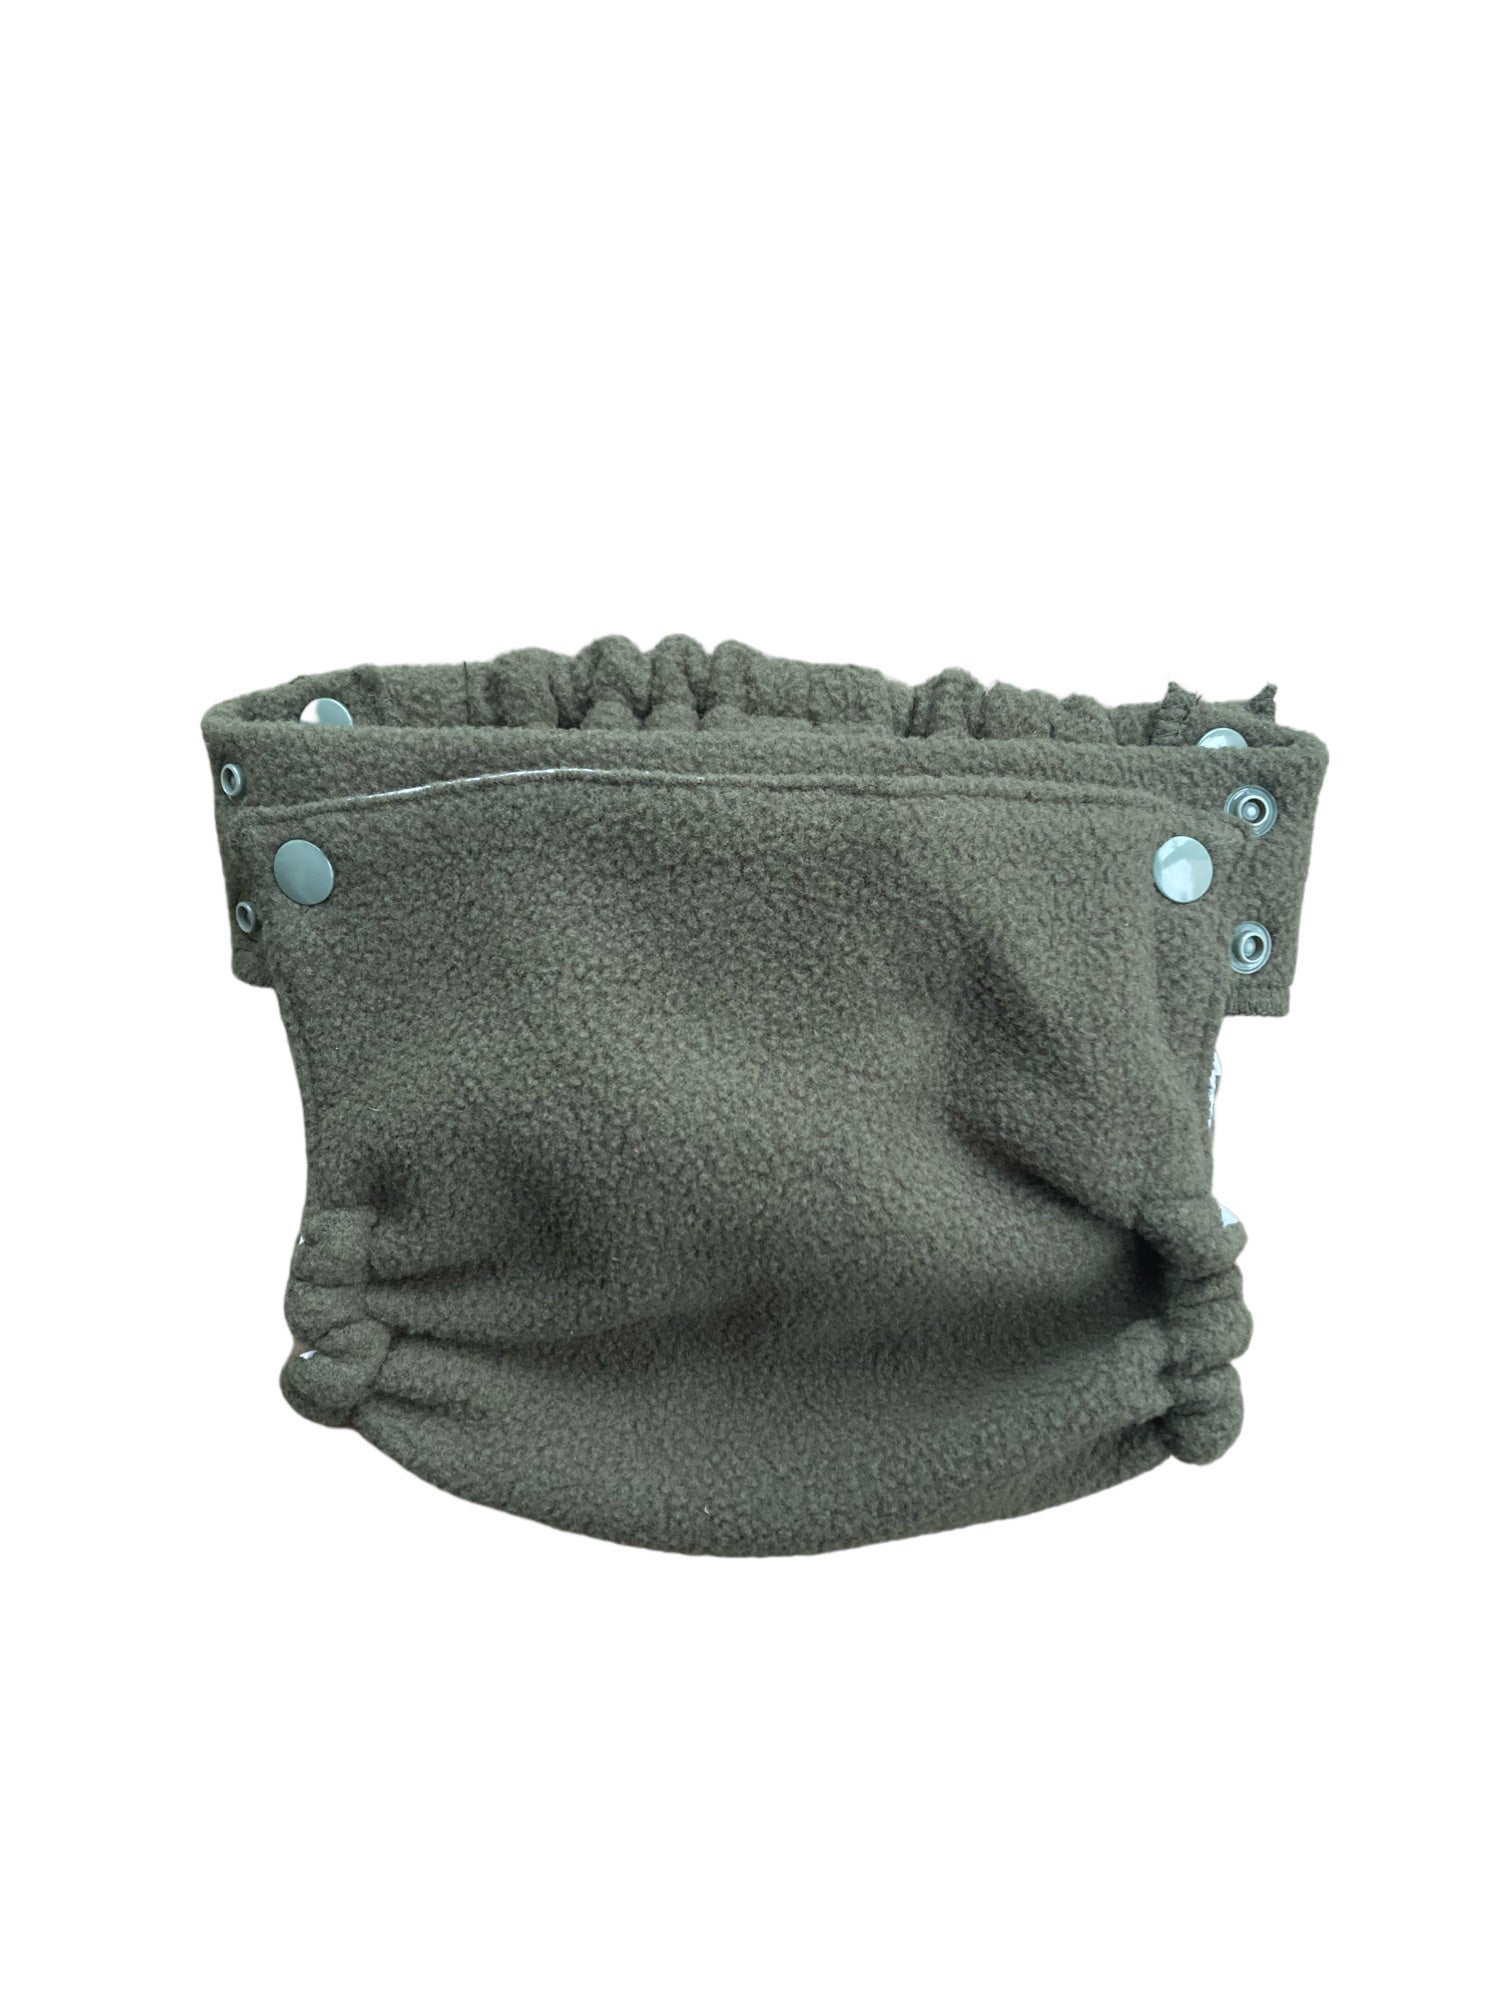 All-In-Two Diaper and Belt (PUL/Fleece)